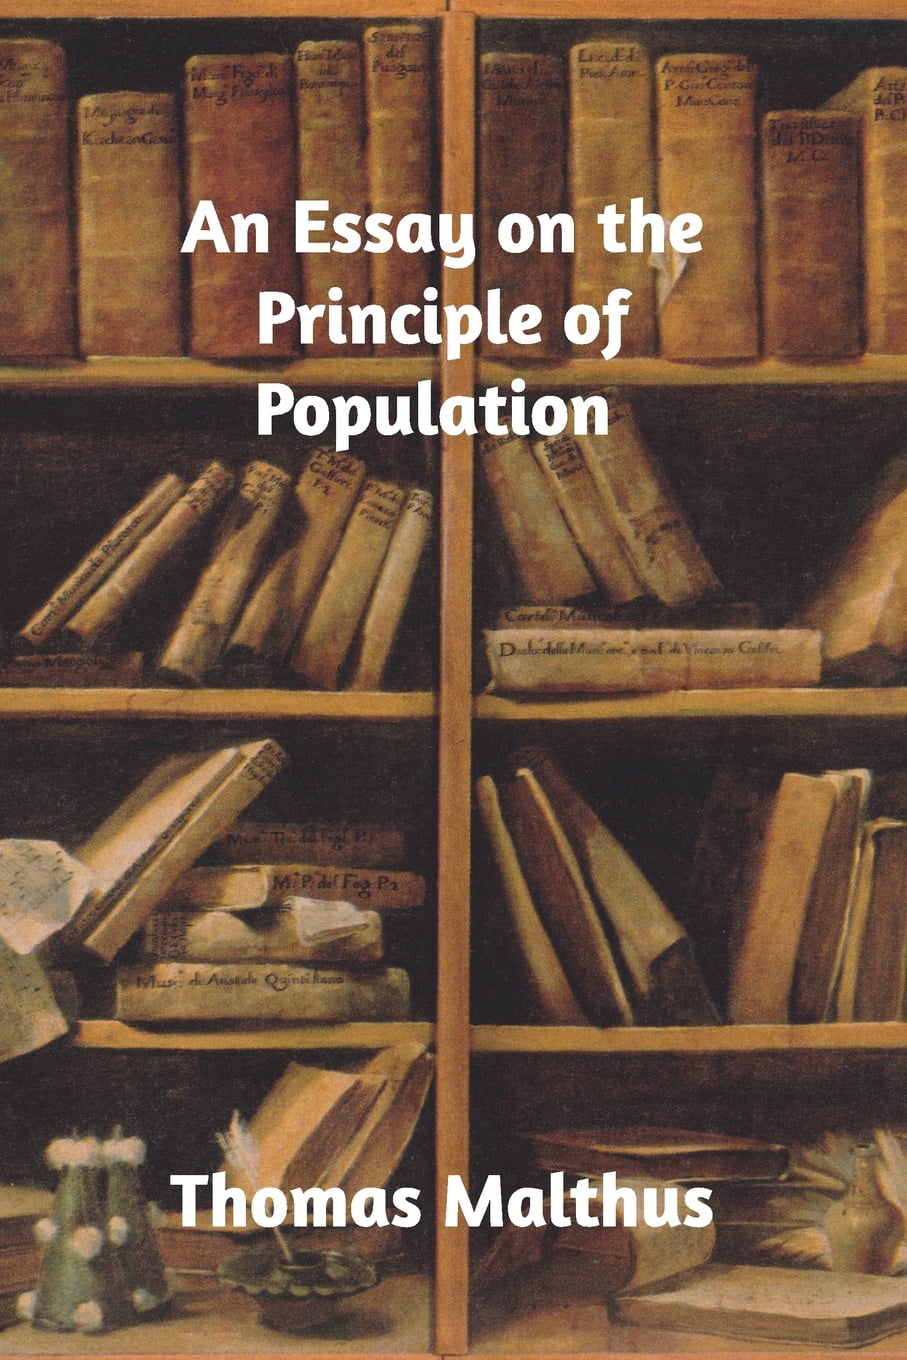 wrote the essay on the principle of population